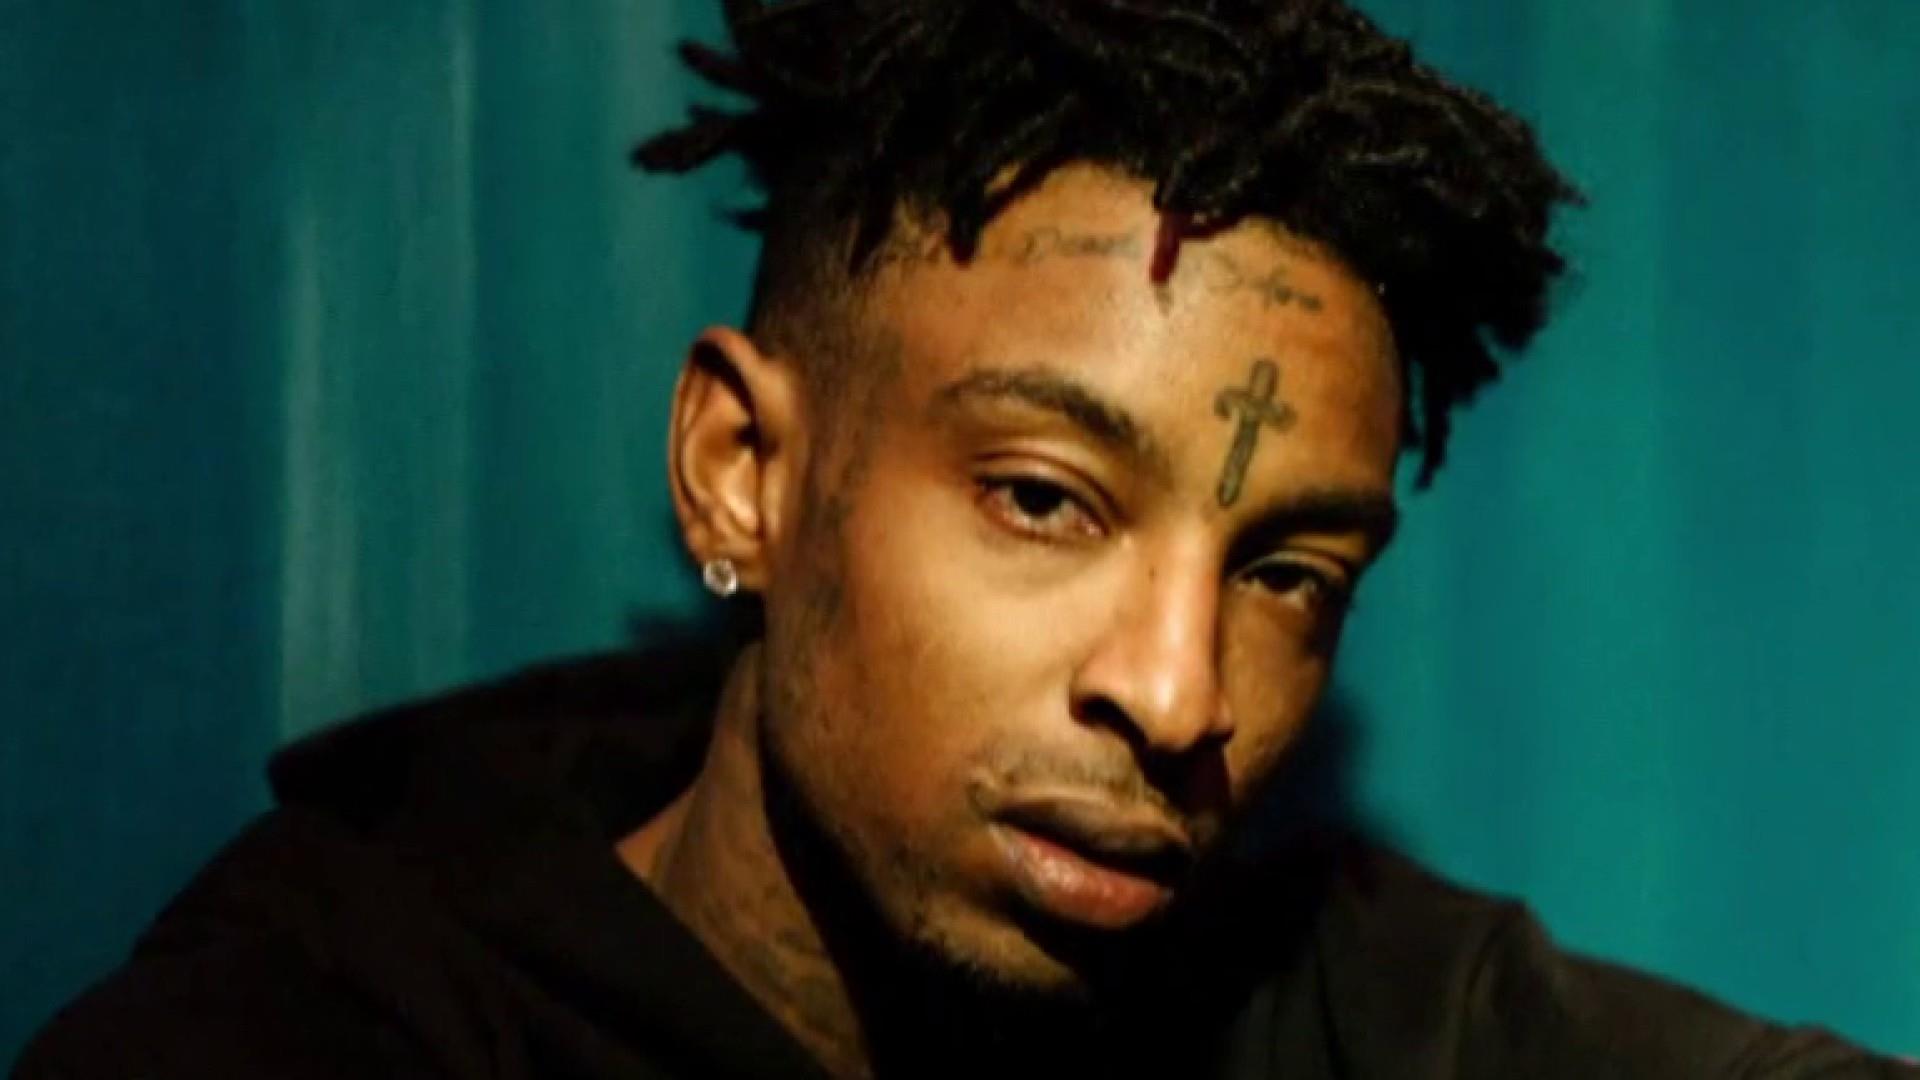 Image result for 21 savage